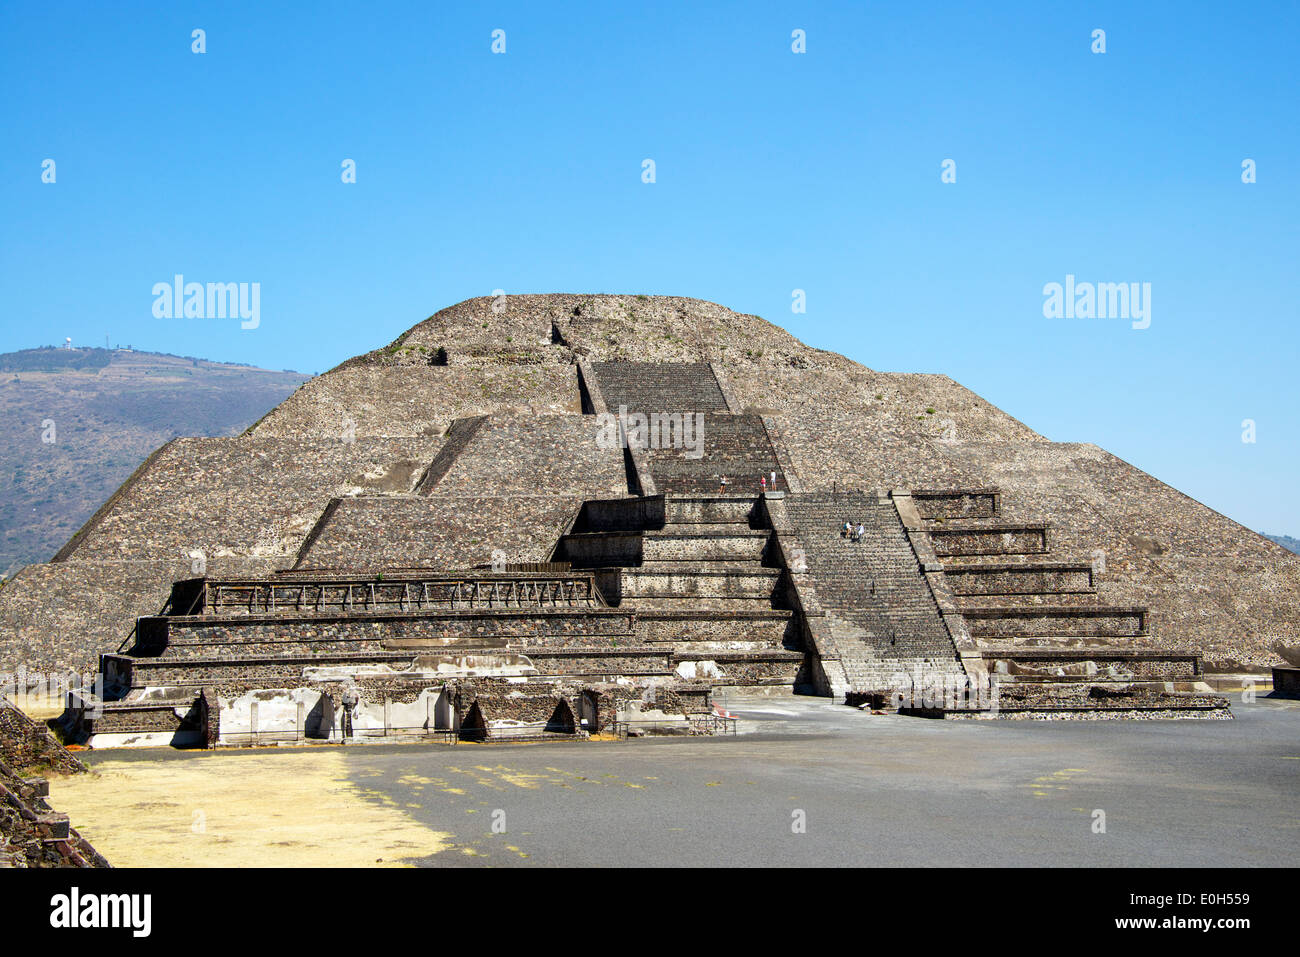 Pyramid of the Moon Teotihuacan Mexico Stock Photo